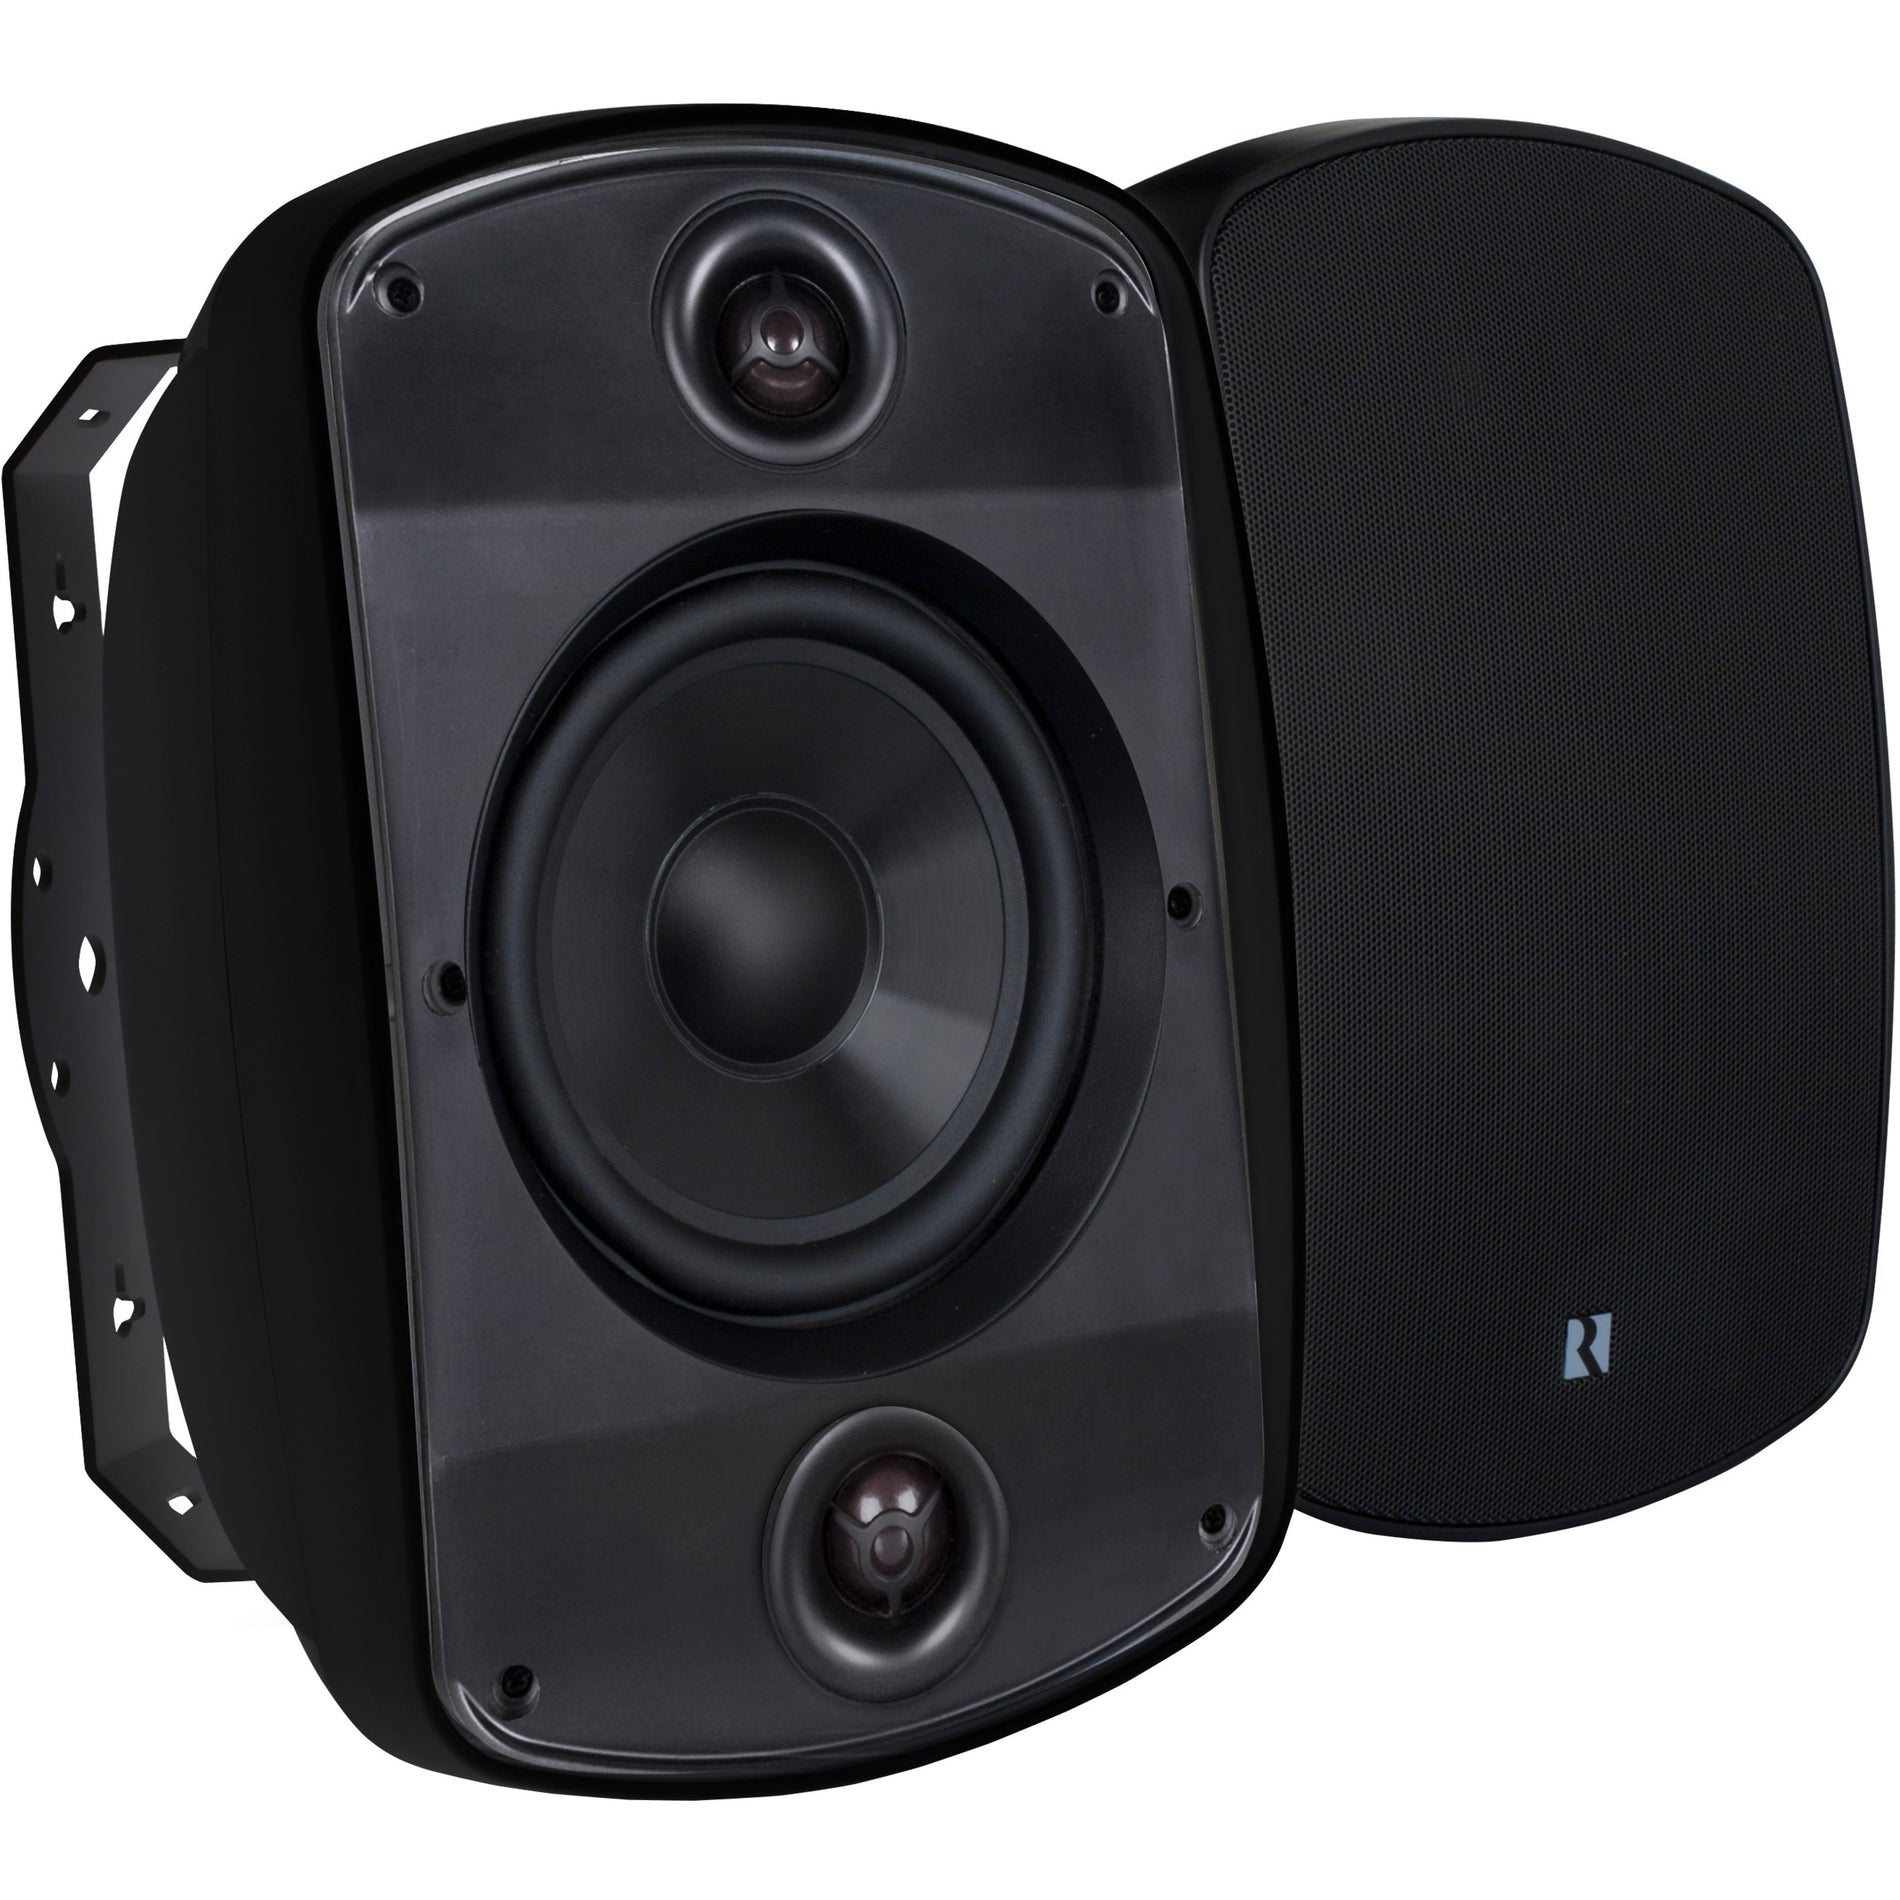 Russound 5B65SMK2-B Acclaim 6.5" OutBack Single Point Stereo Speaker in Black, Indoor/Outdoor/Bookshelf